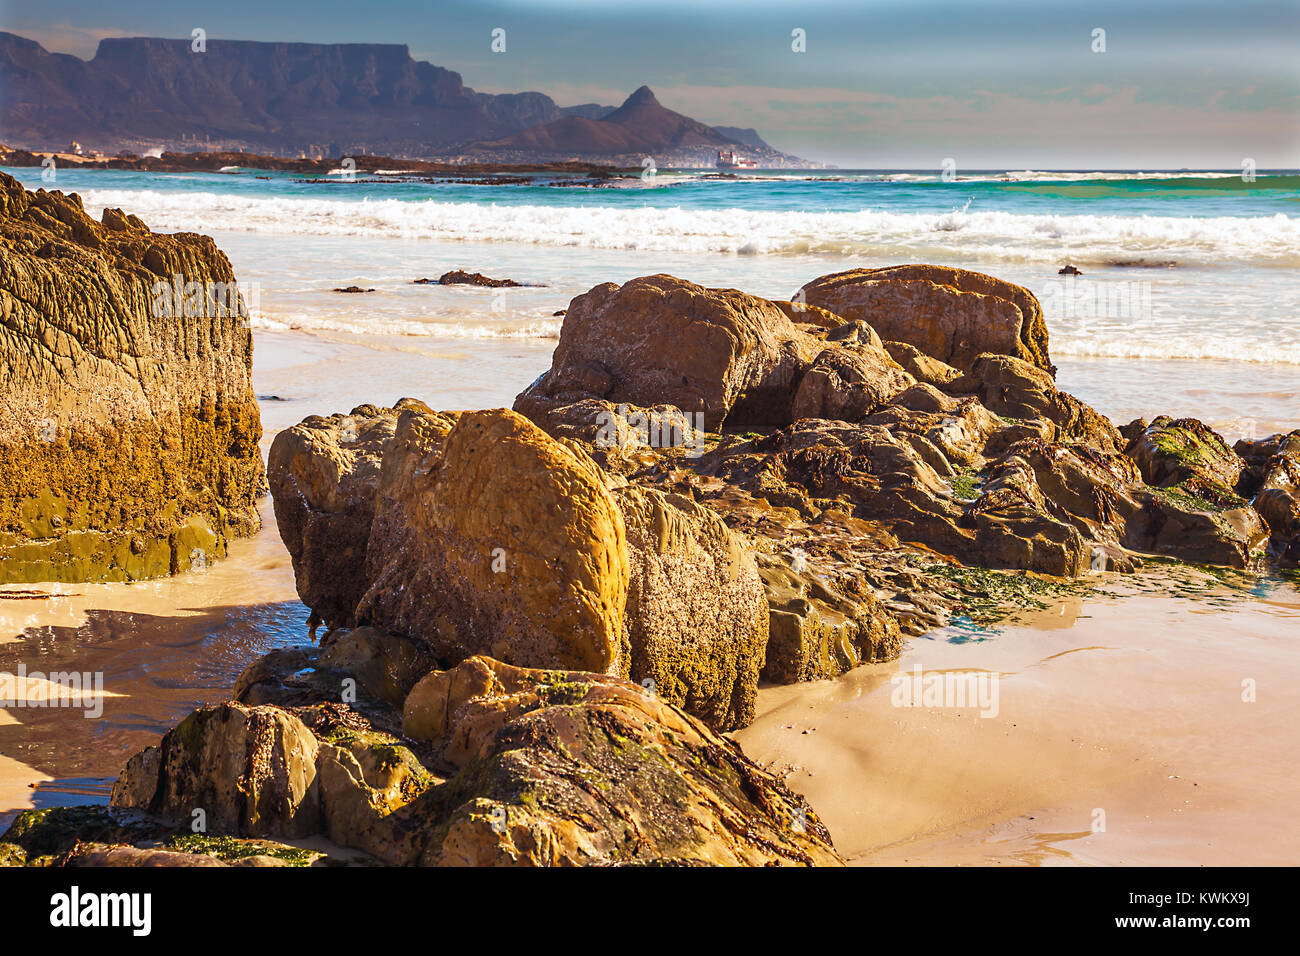 At Blouberg Beach South Africa Stock Photo